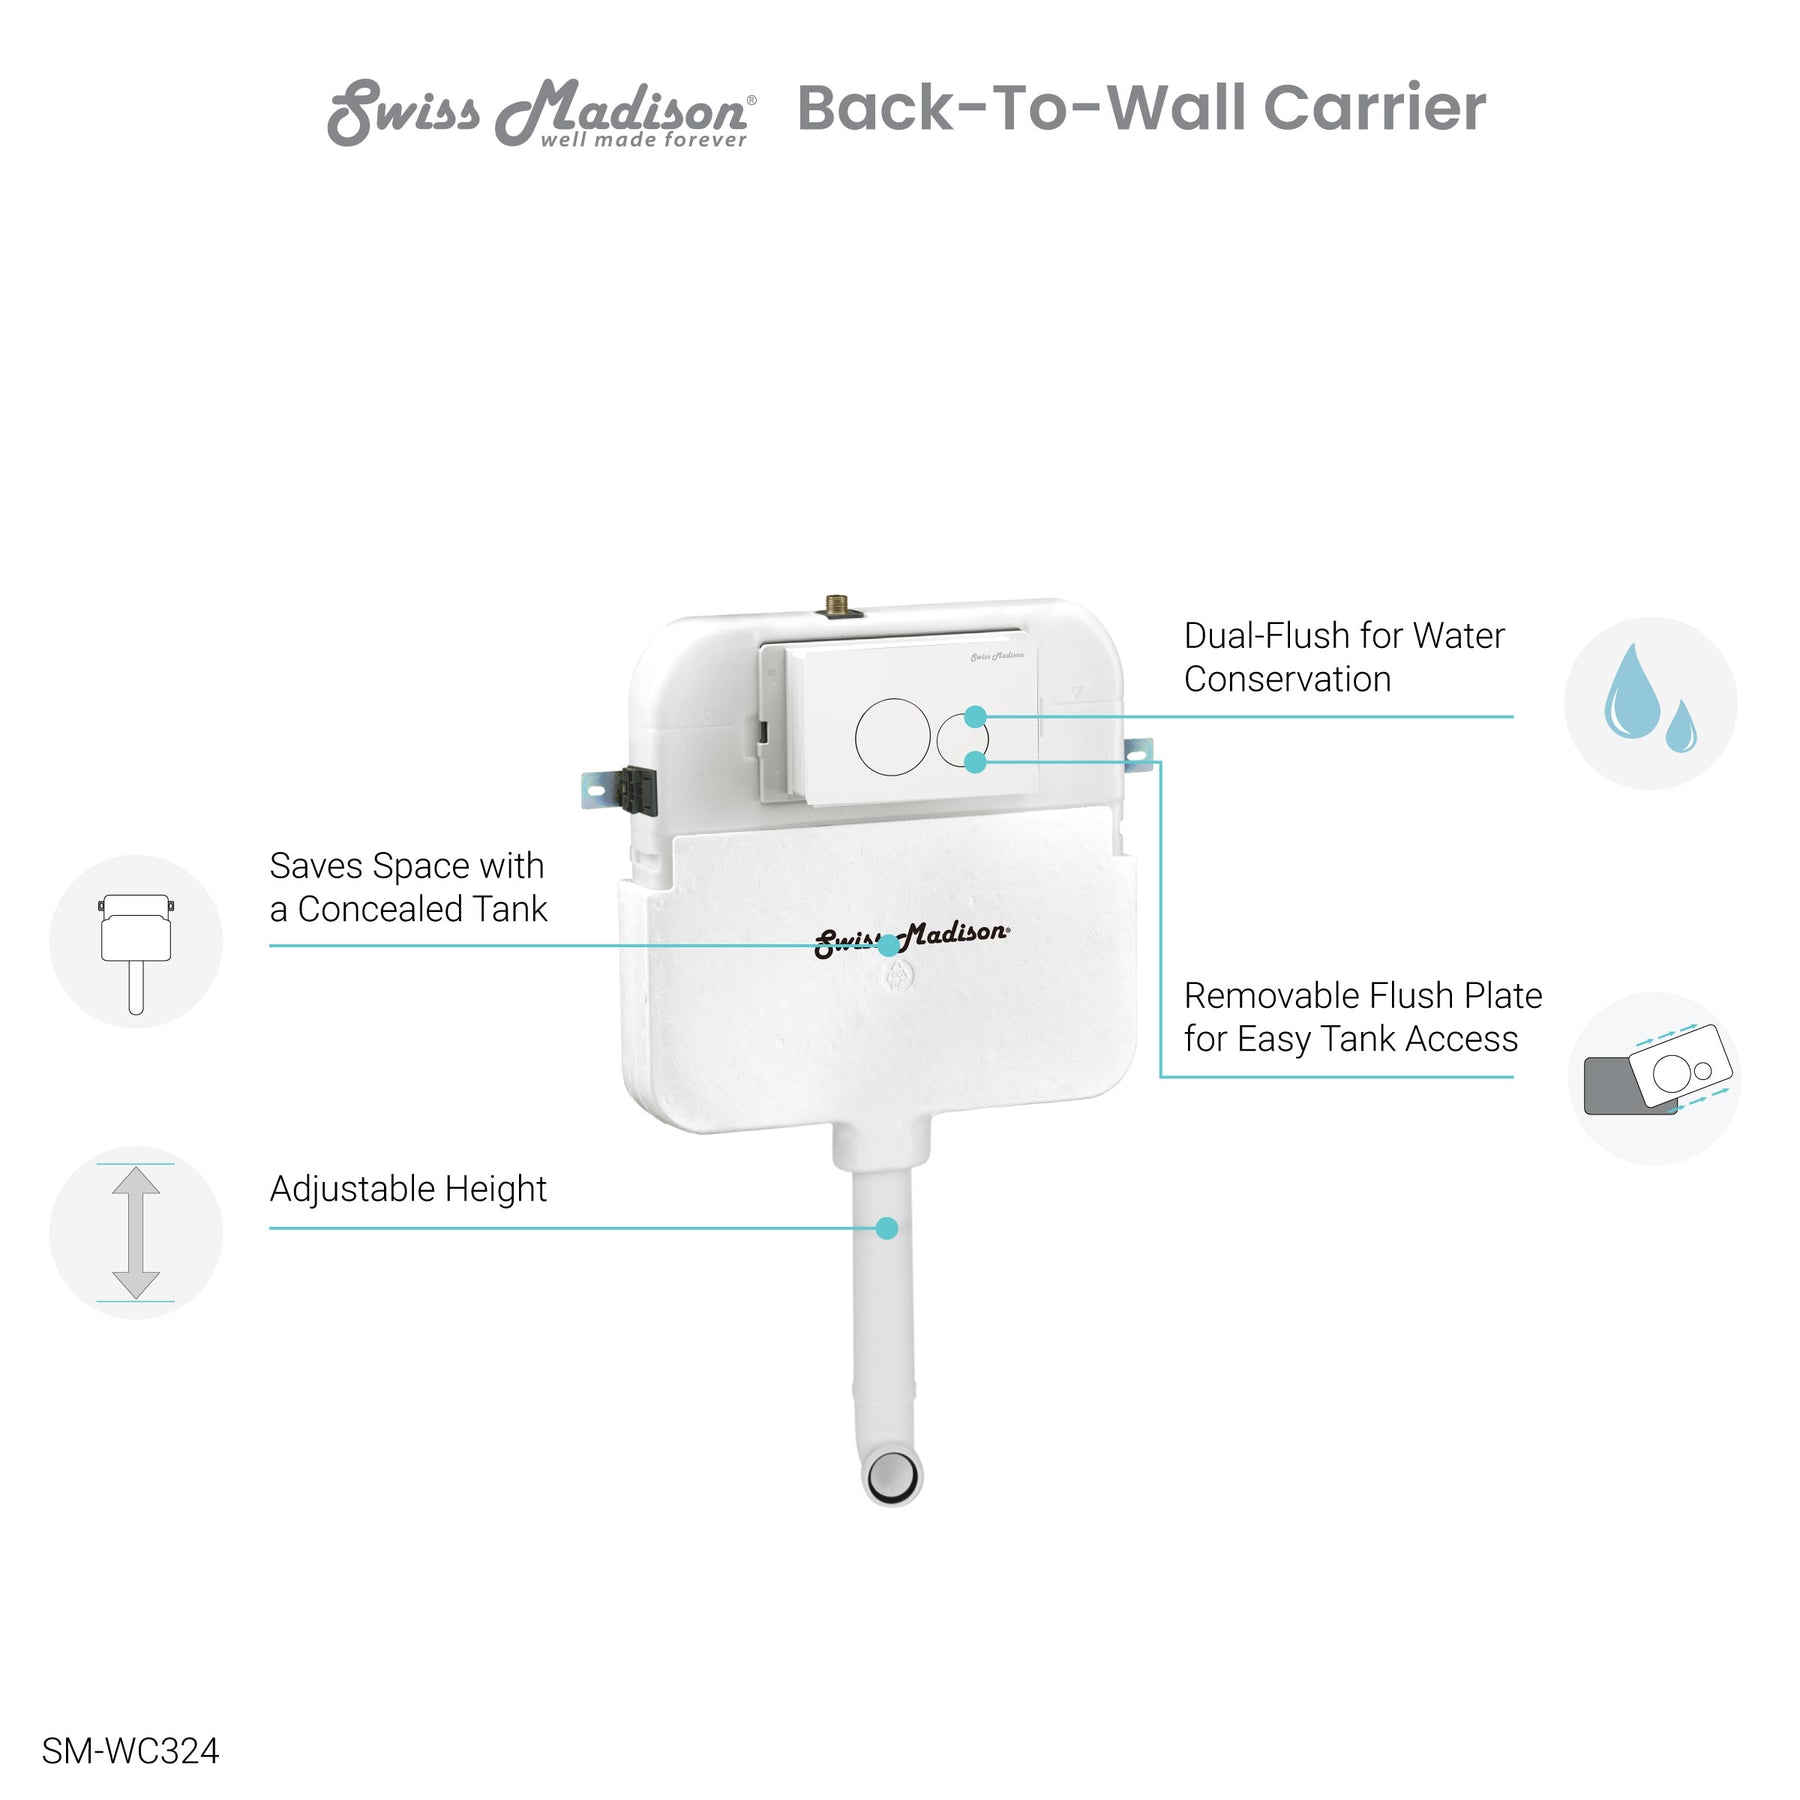 Swiss Madison 2x4 Concealed In-Wall Toilet Tank Carrier for Back-to-Wall Toilet - SM-WC324